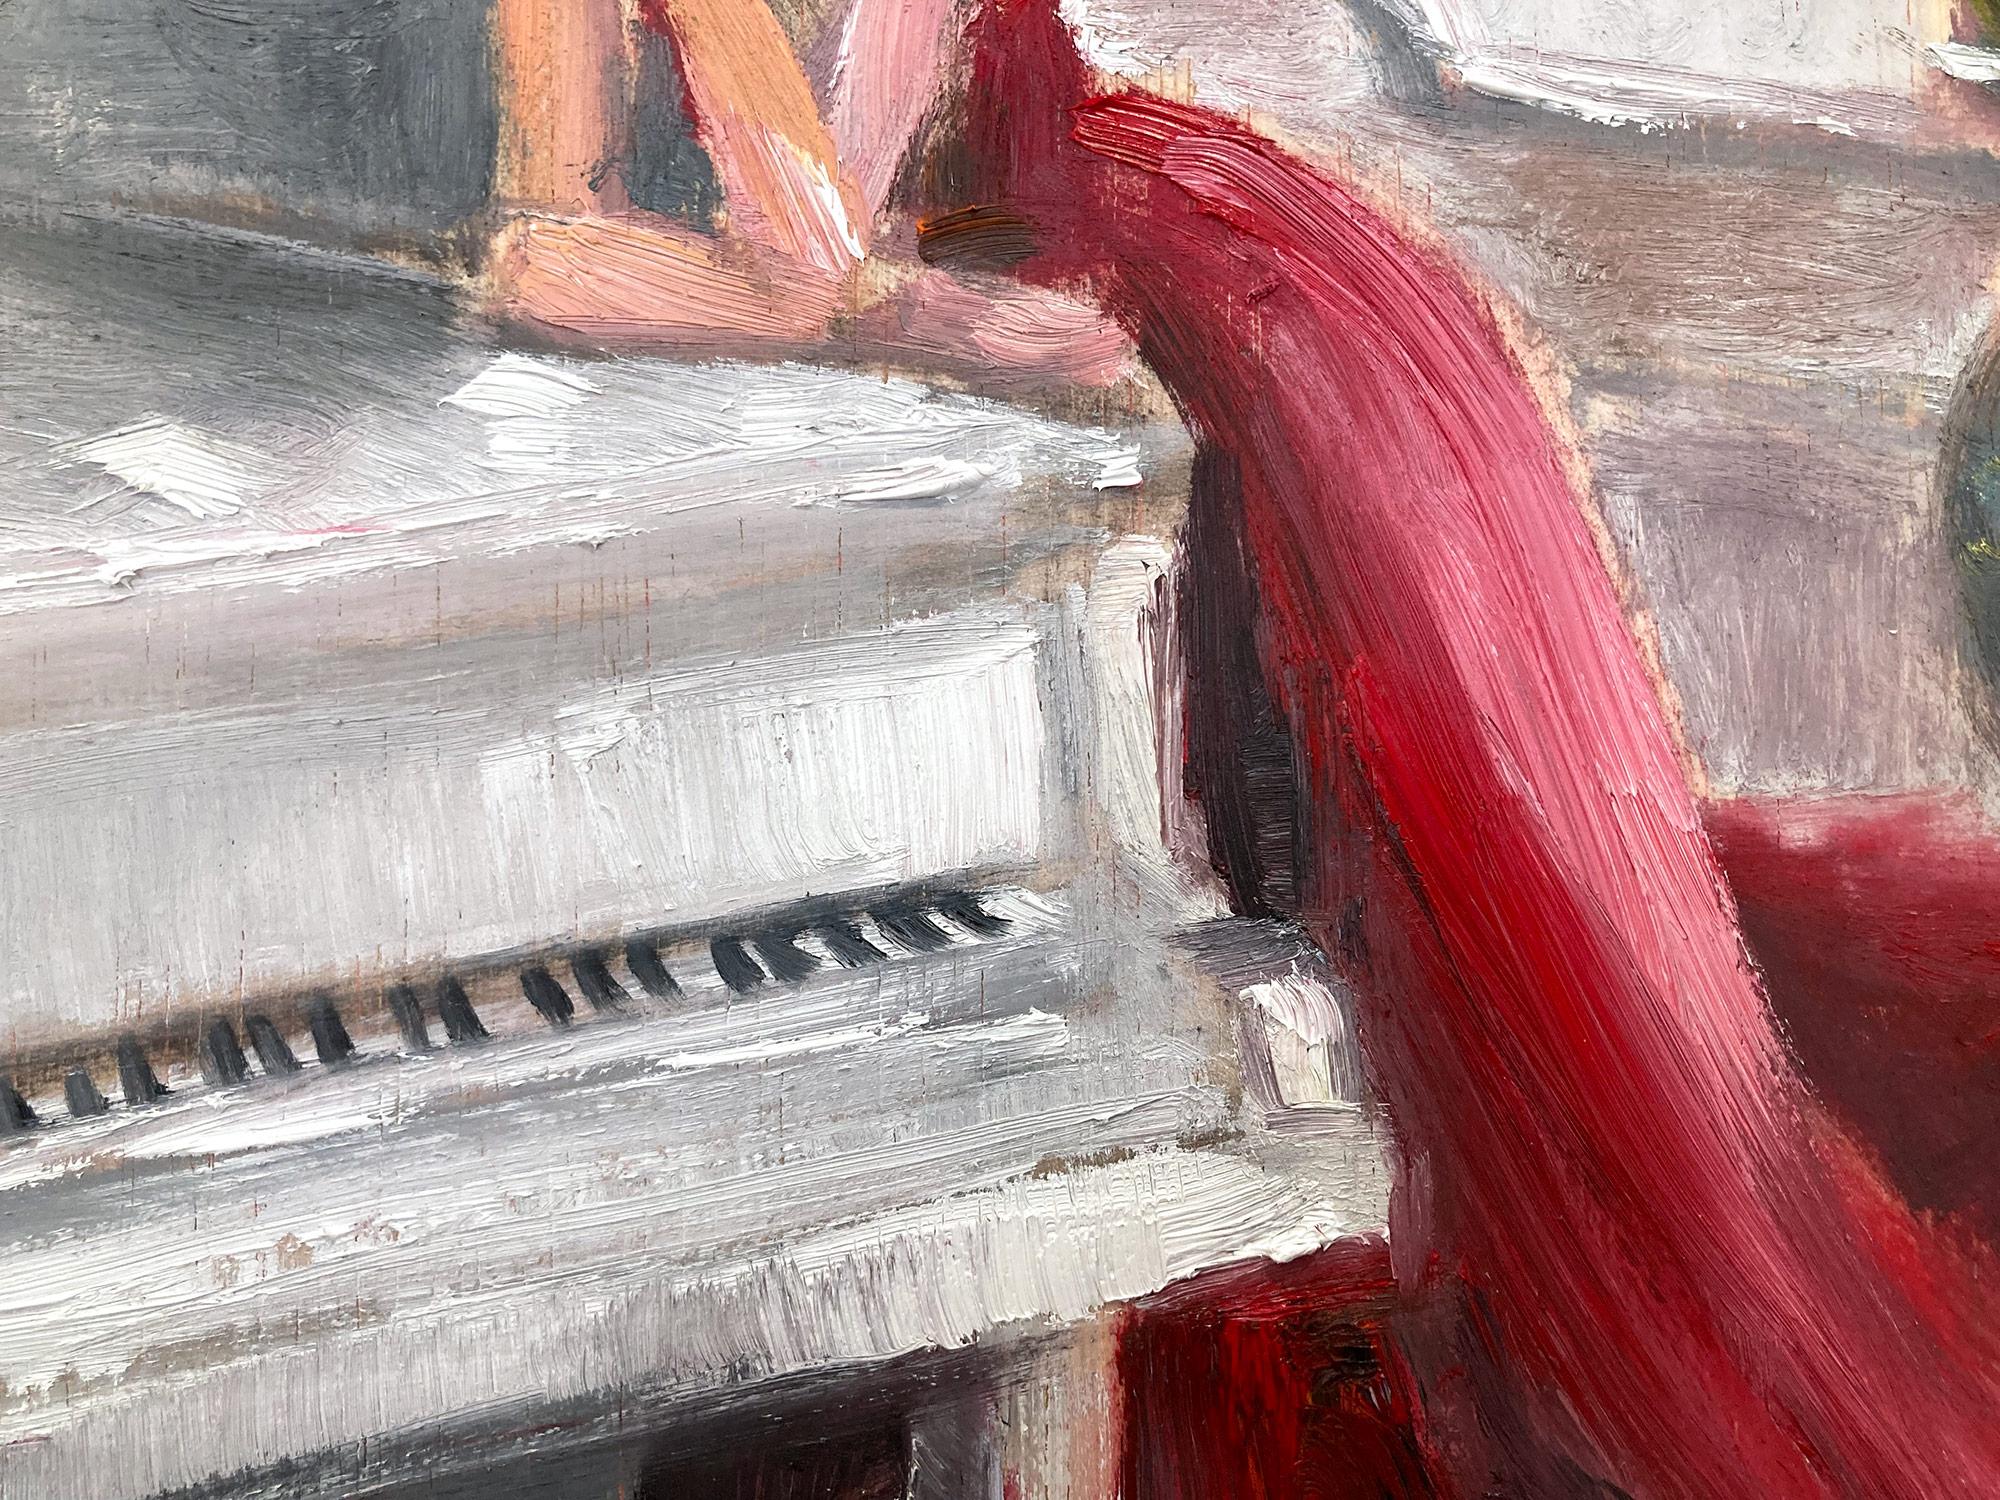 A very whimsical depiction of a woman in a red dress leaning on a beautiful white piano in thought. This piece captures the essence of fashion and Haute Couture effortlessly. Done in a very modern and impressionistic style, the colors are bright yet